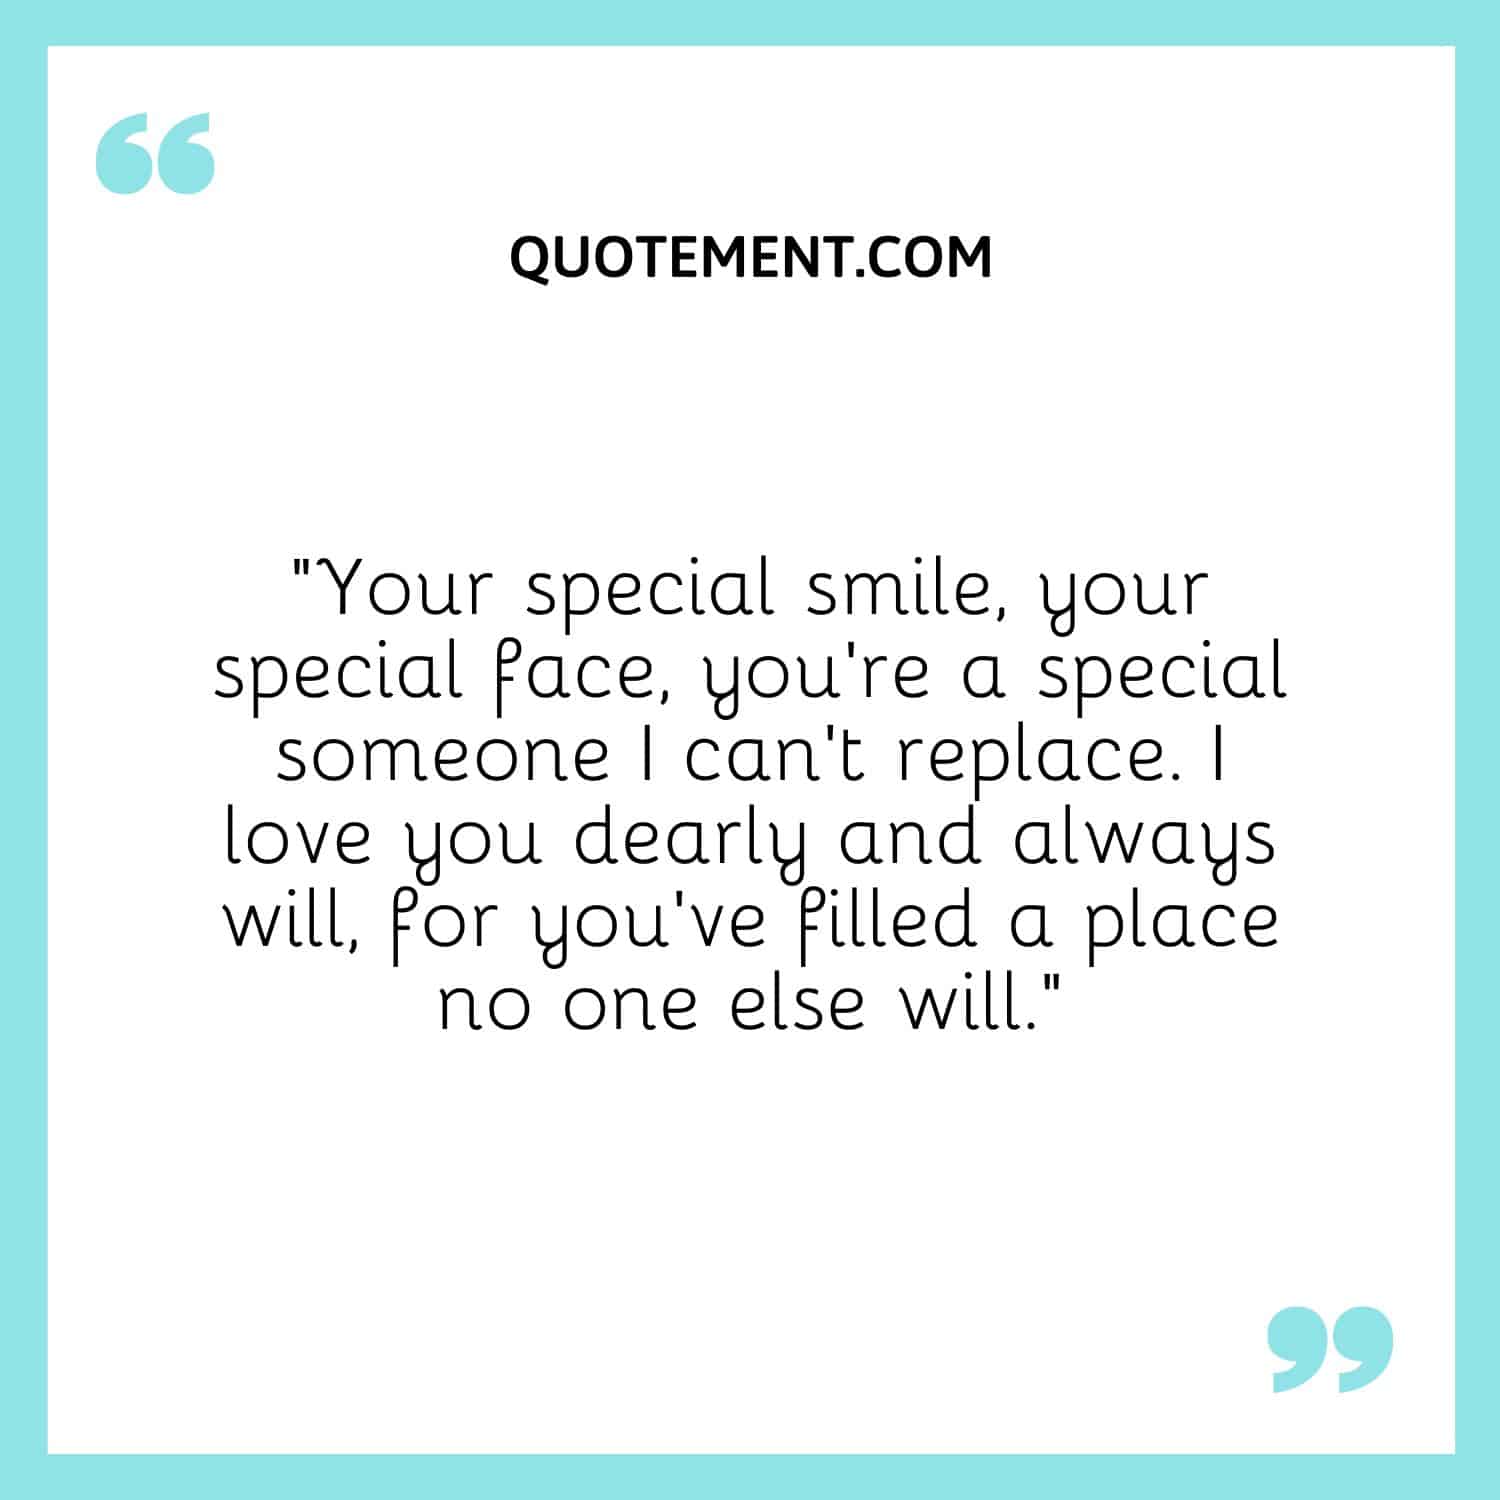 Your special smile, your special face, you're a special someone I can't replace